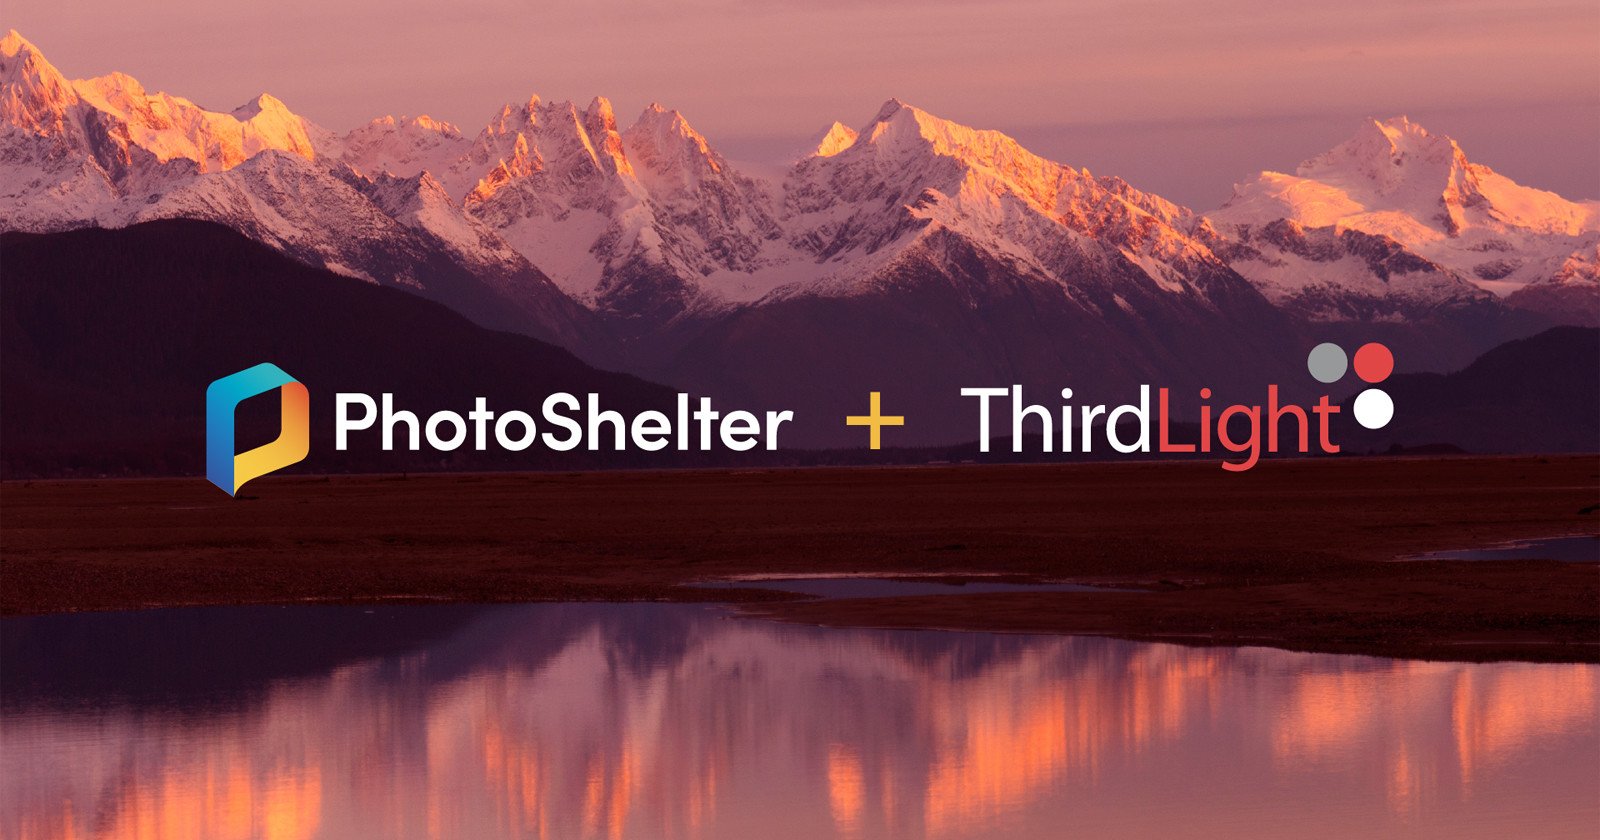 PhotoShelter Acquires Third Light to Add More Data Management Tools